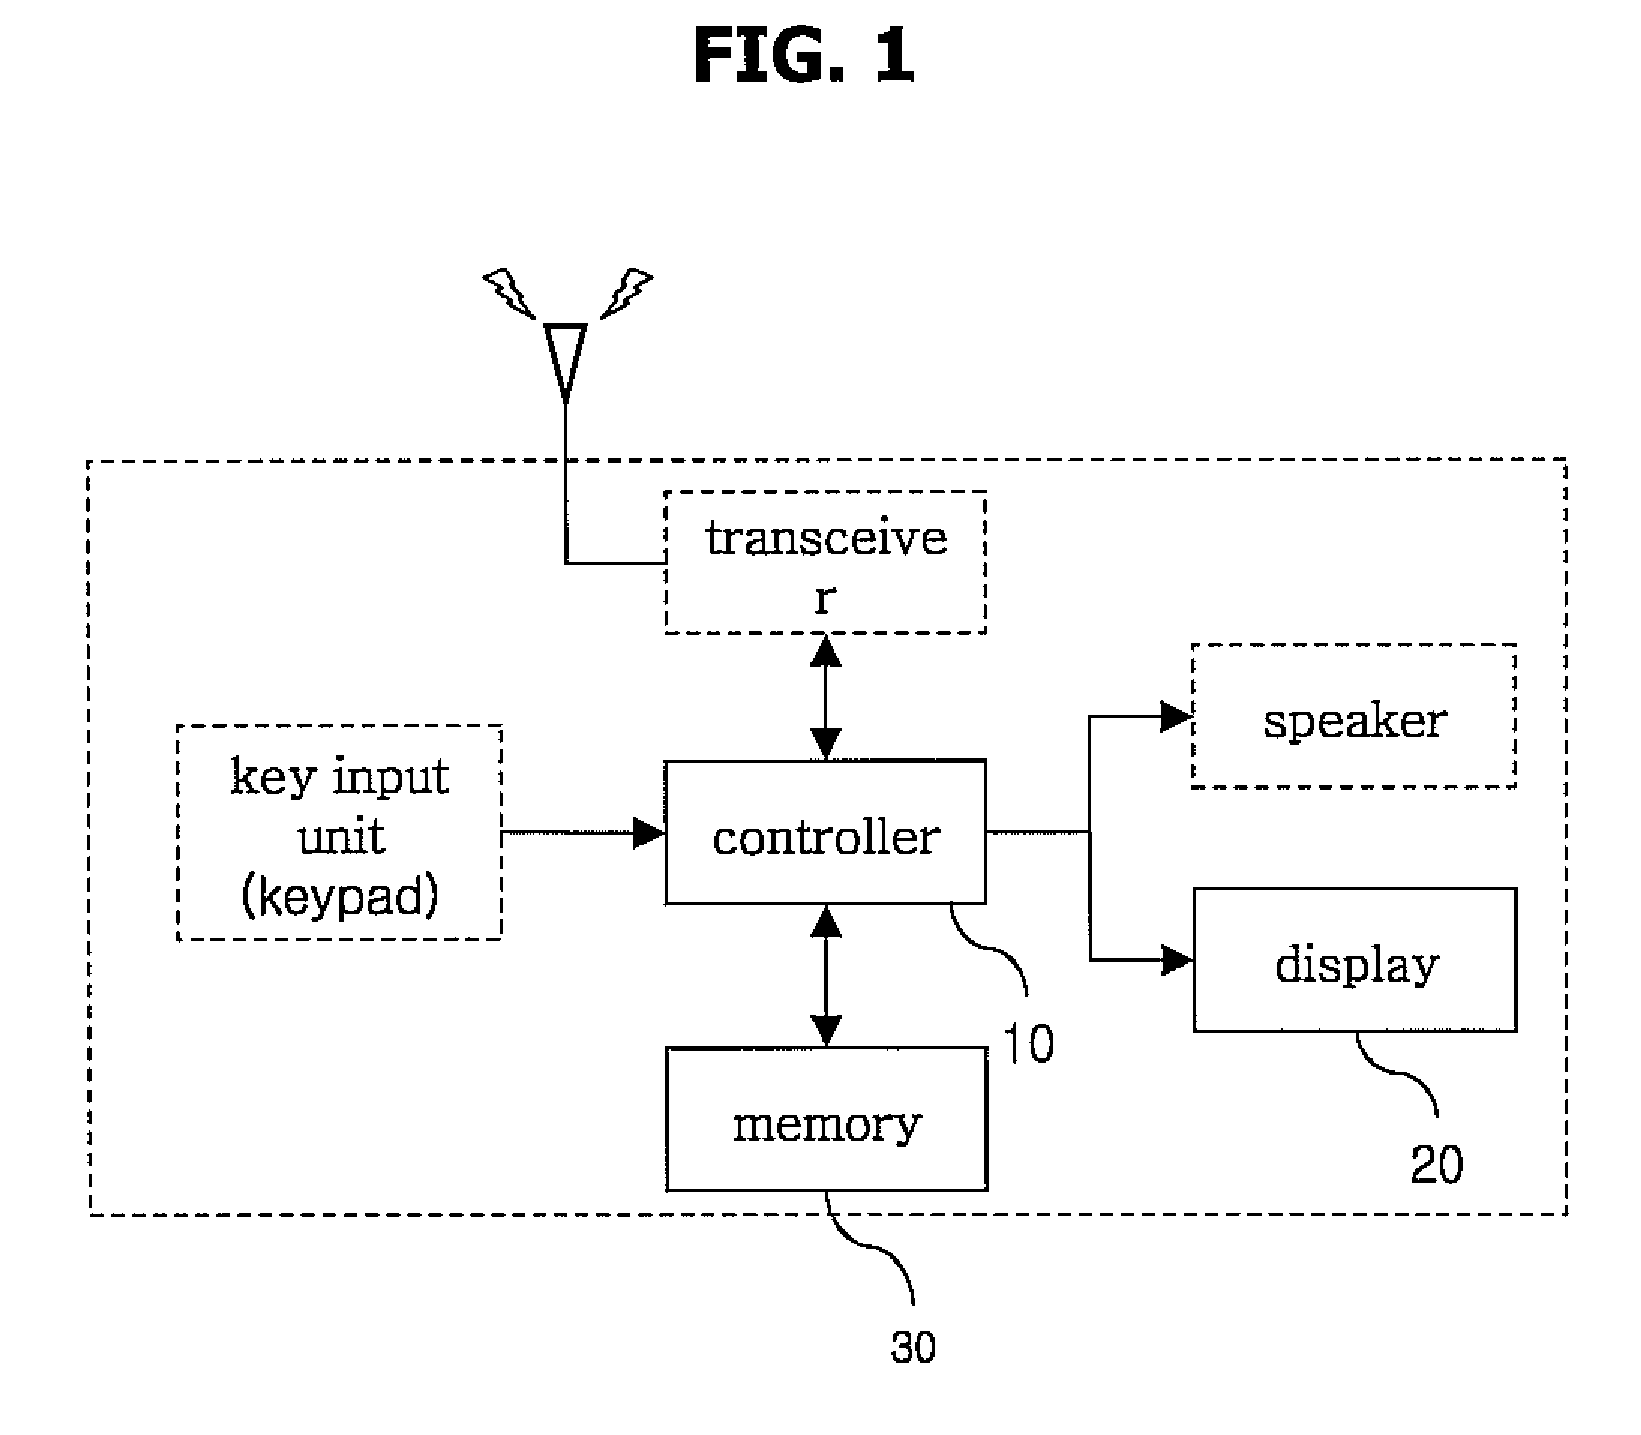 Apparatus and method for displaying a mobile terminal standby screen